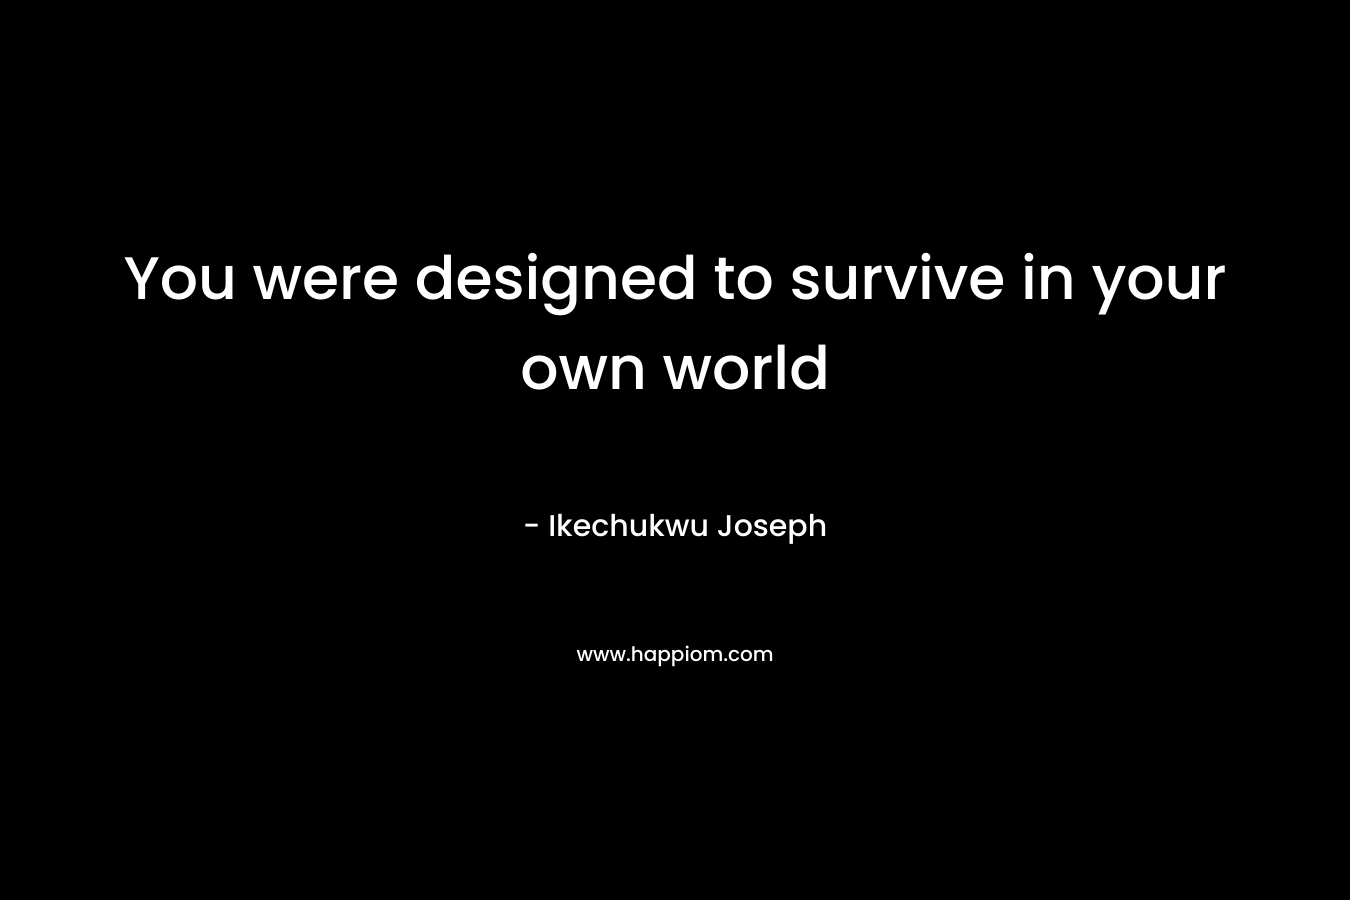 You were designed to survive in your own world